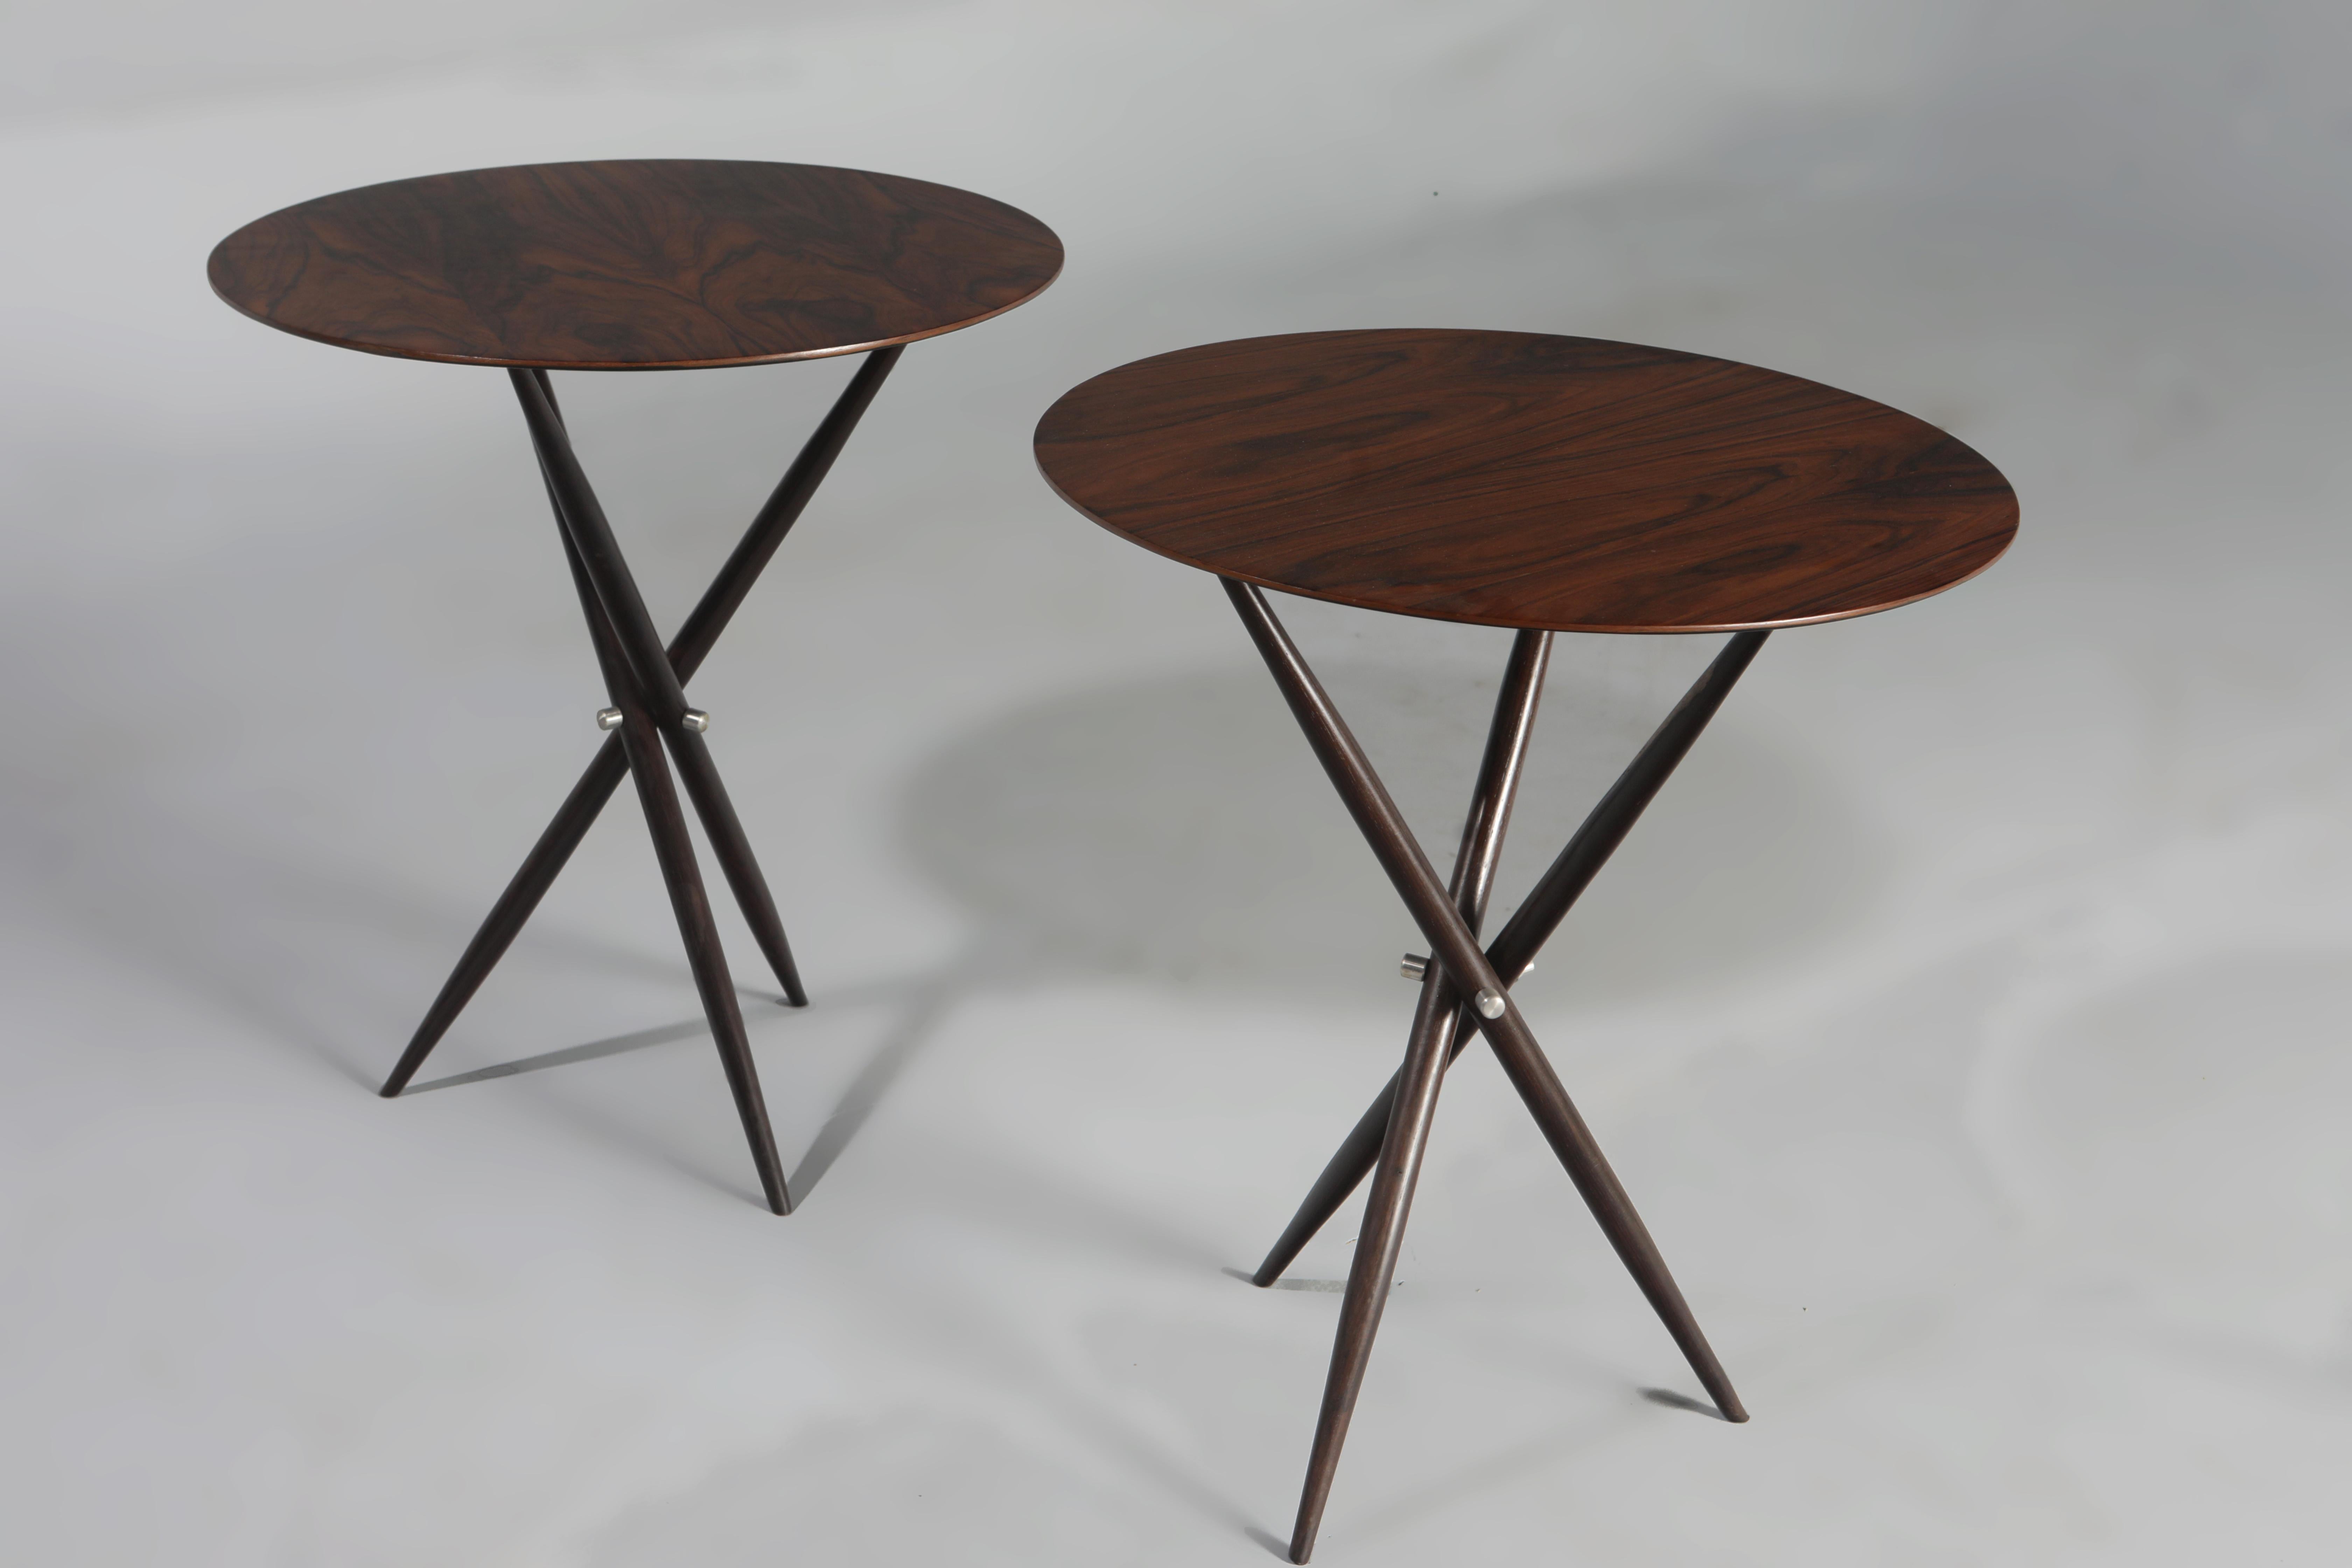 Brazilian Mid-Century Modern Pair of Janete Side Tables by Sergio Rodrigues, Brazil, 1950s